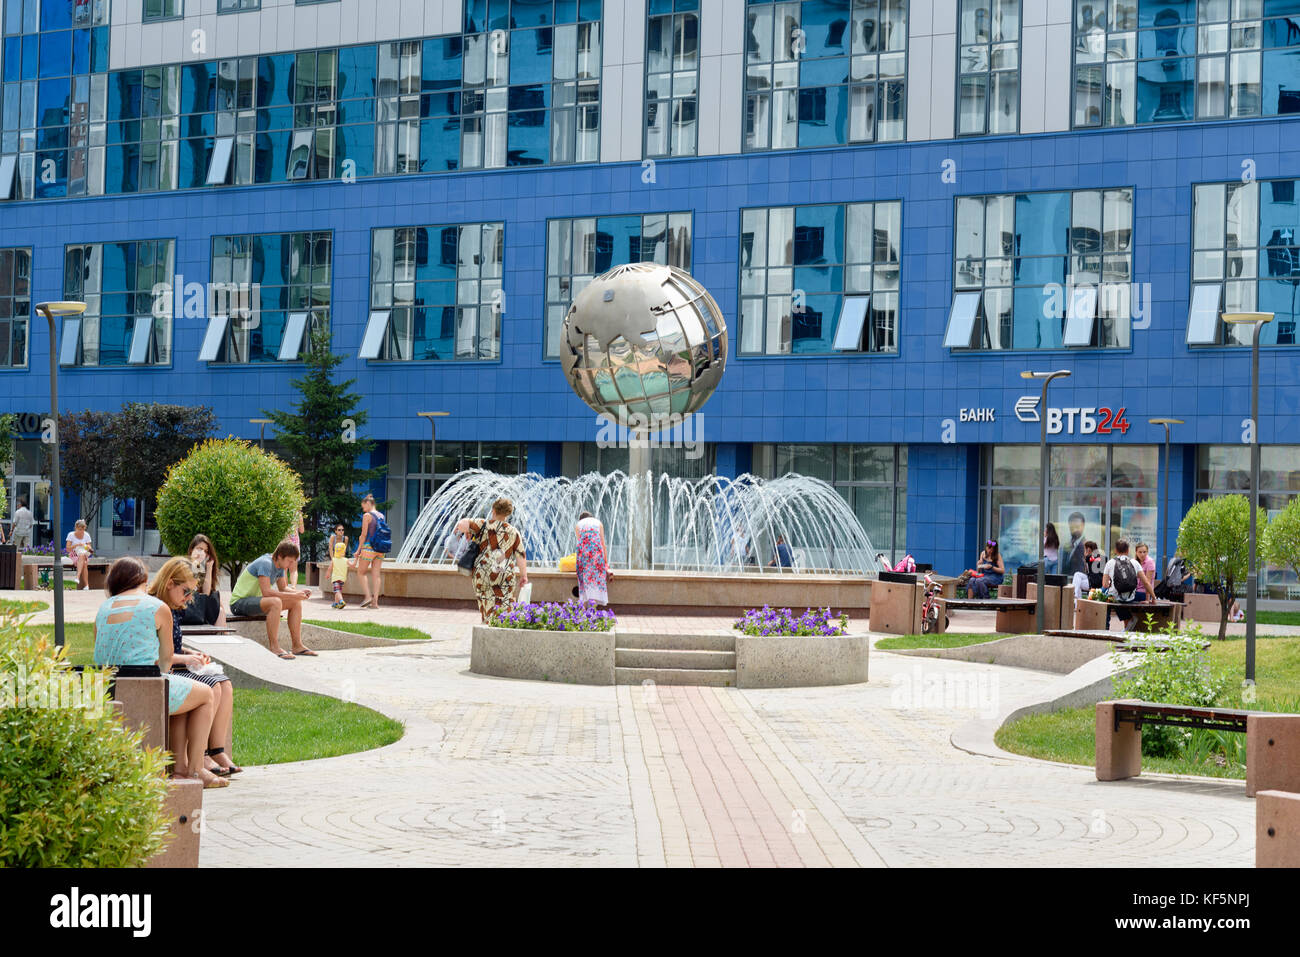 Novosibirsk, Russia - June 29, 2017: Globe Fountain in small park at Ordzhonikidze street at the center of city Stock Photo